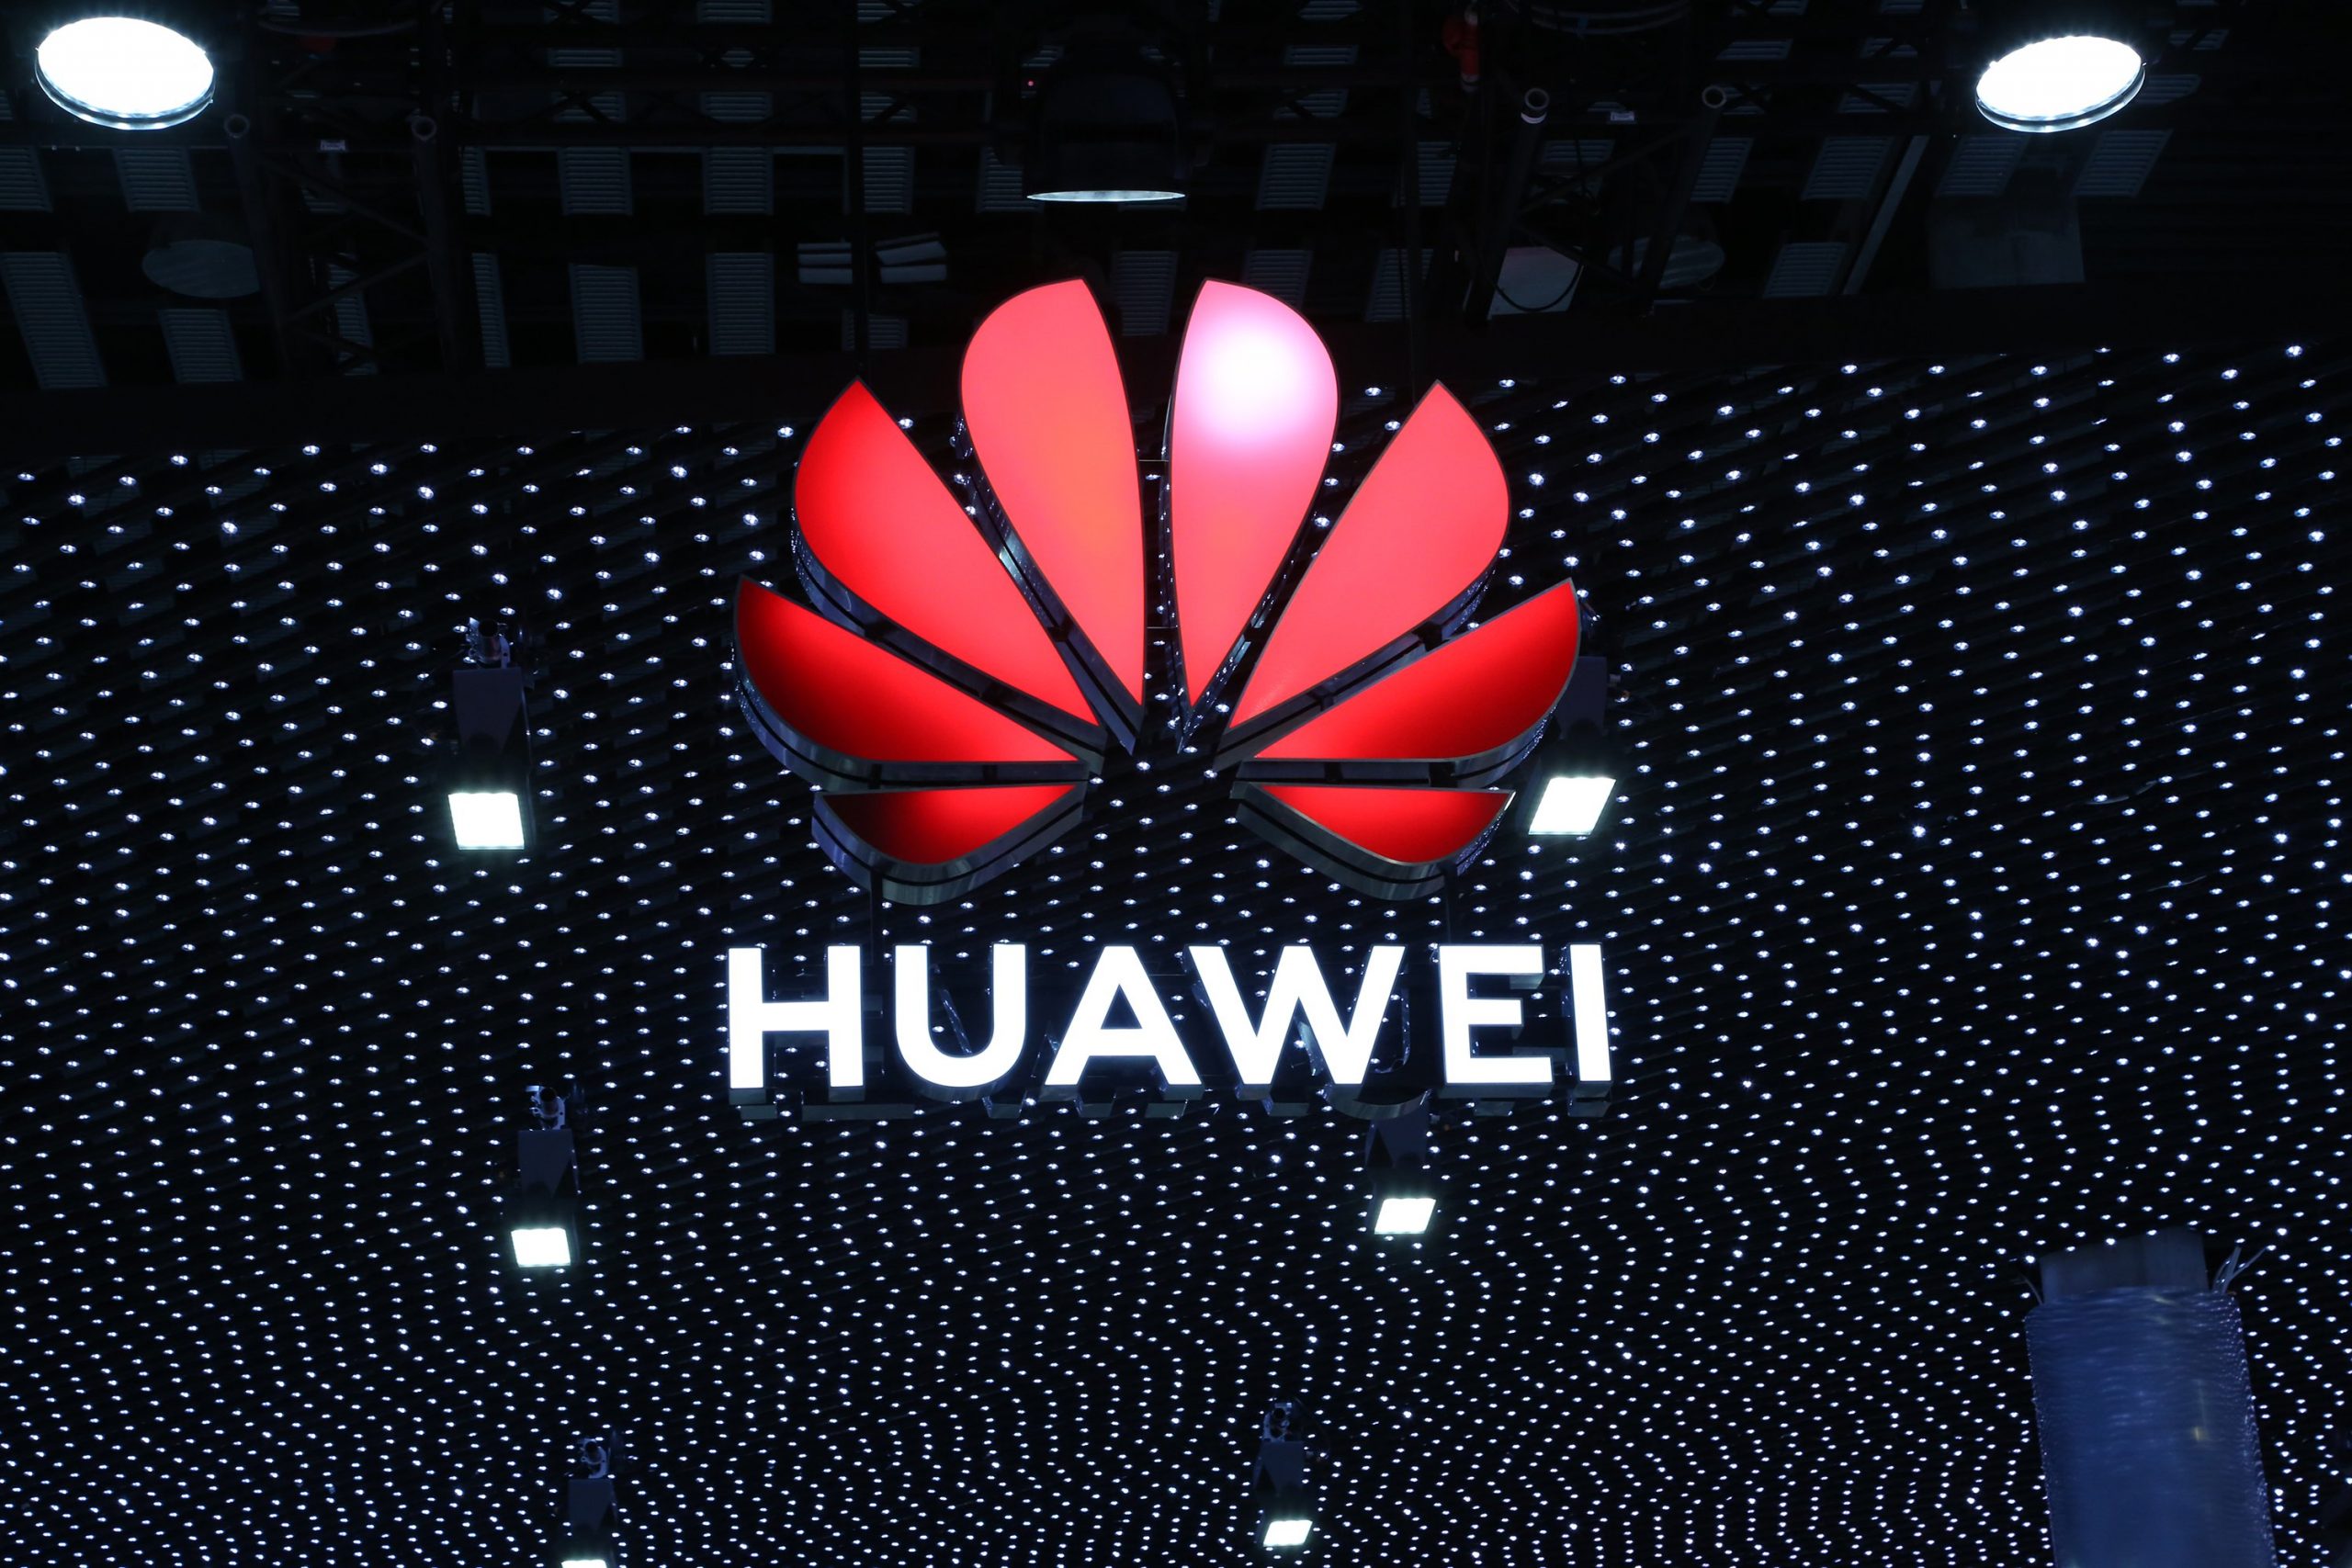 US allows companies to supply chips to Huawei as long as it’s not for 5G business